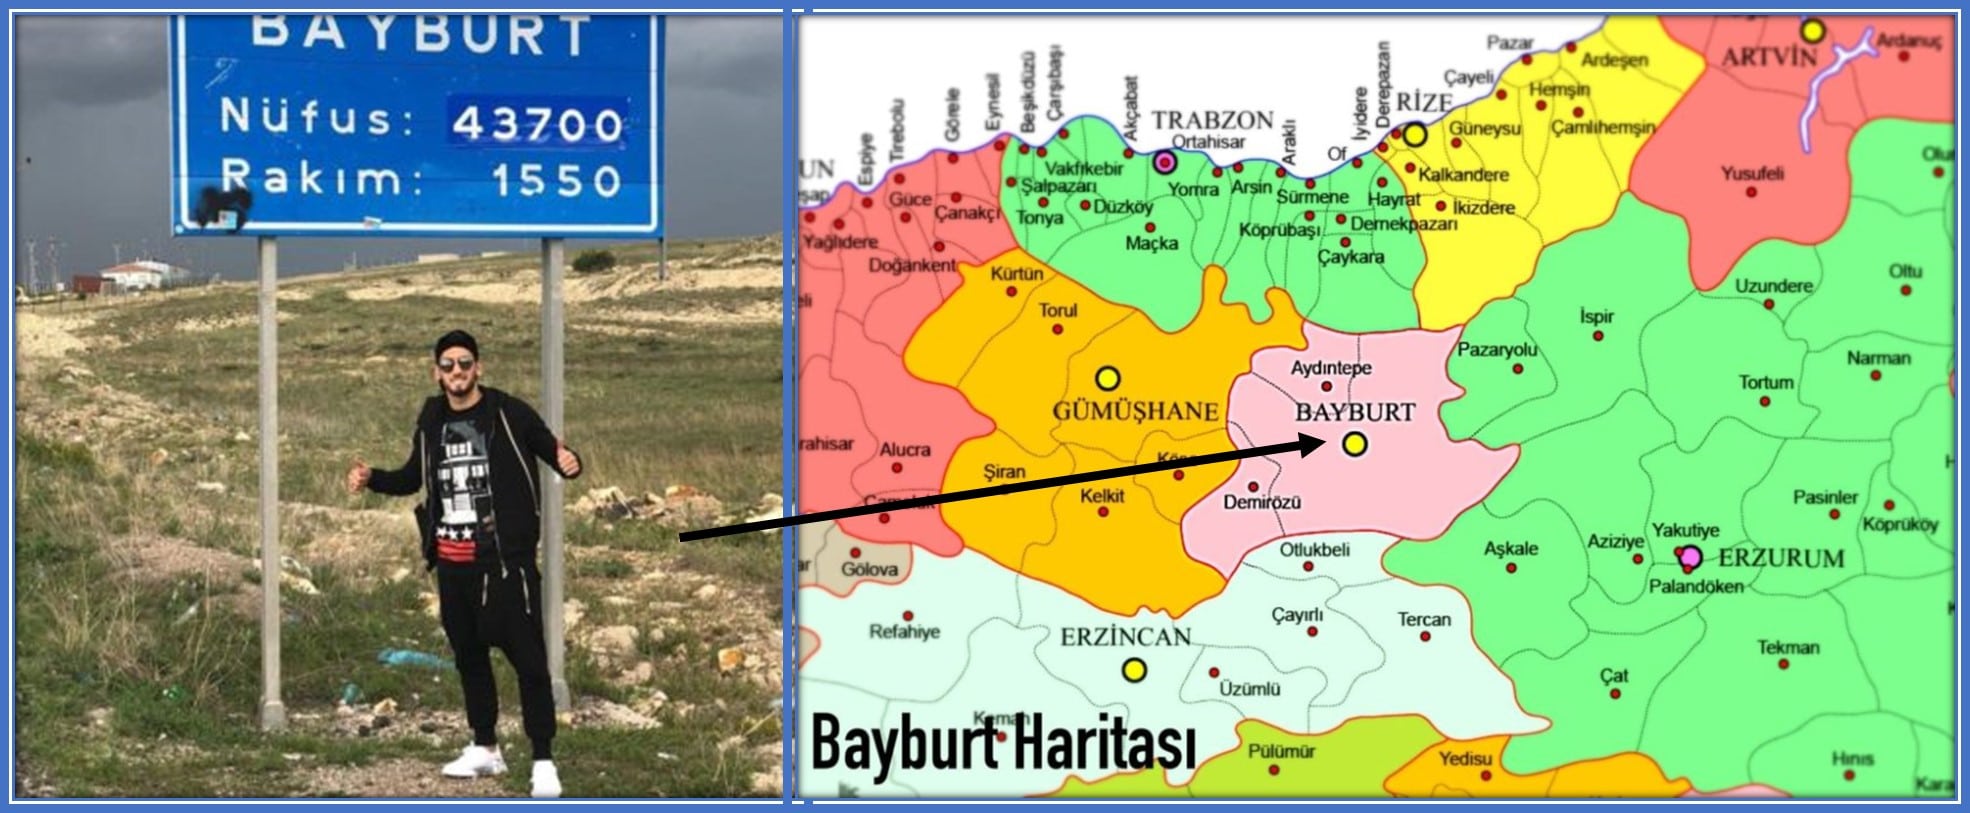 This is the Bayburt Province in Turkey, where Hakan's family comes from.